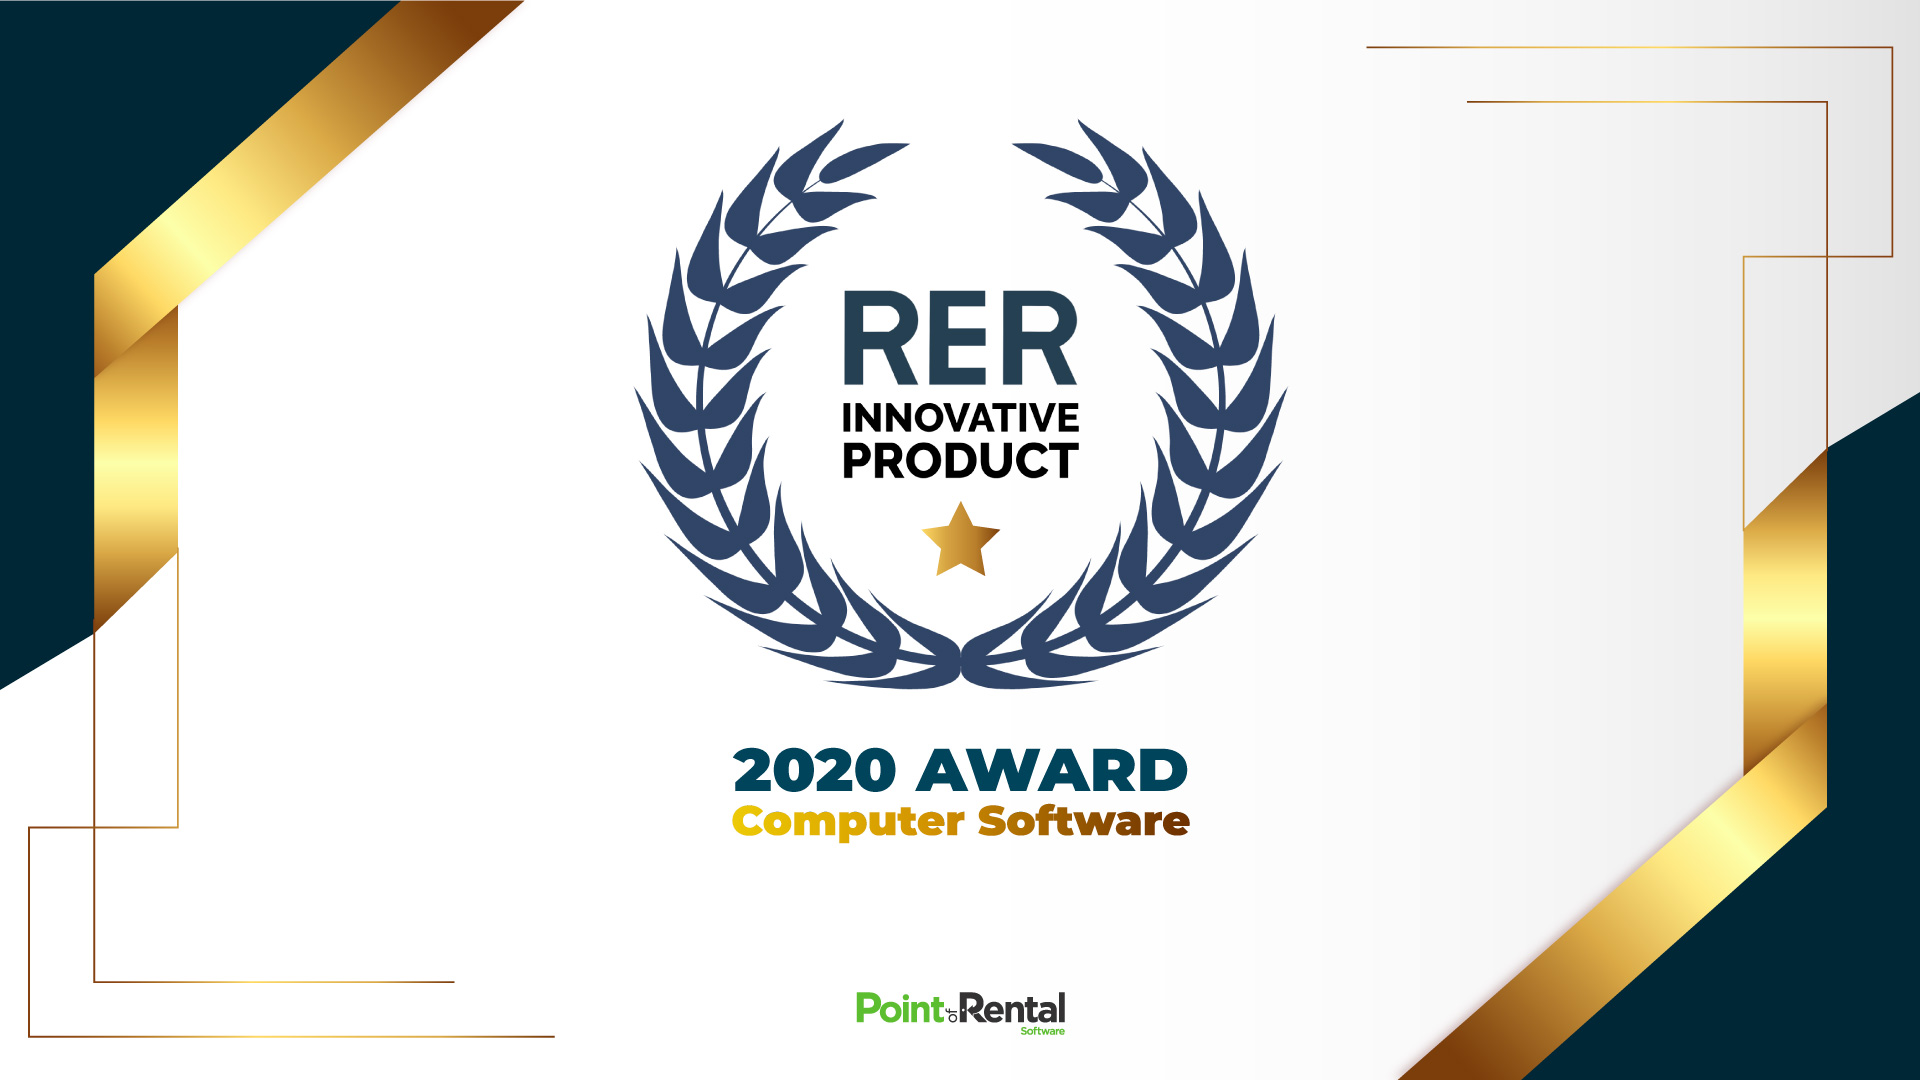 Point of Rental earned a RER Innovative Product Award for Computer Software with their contactless rental solutions